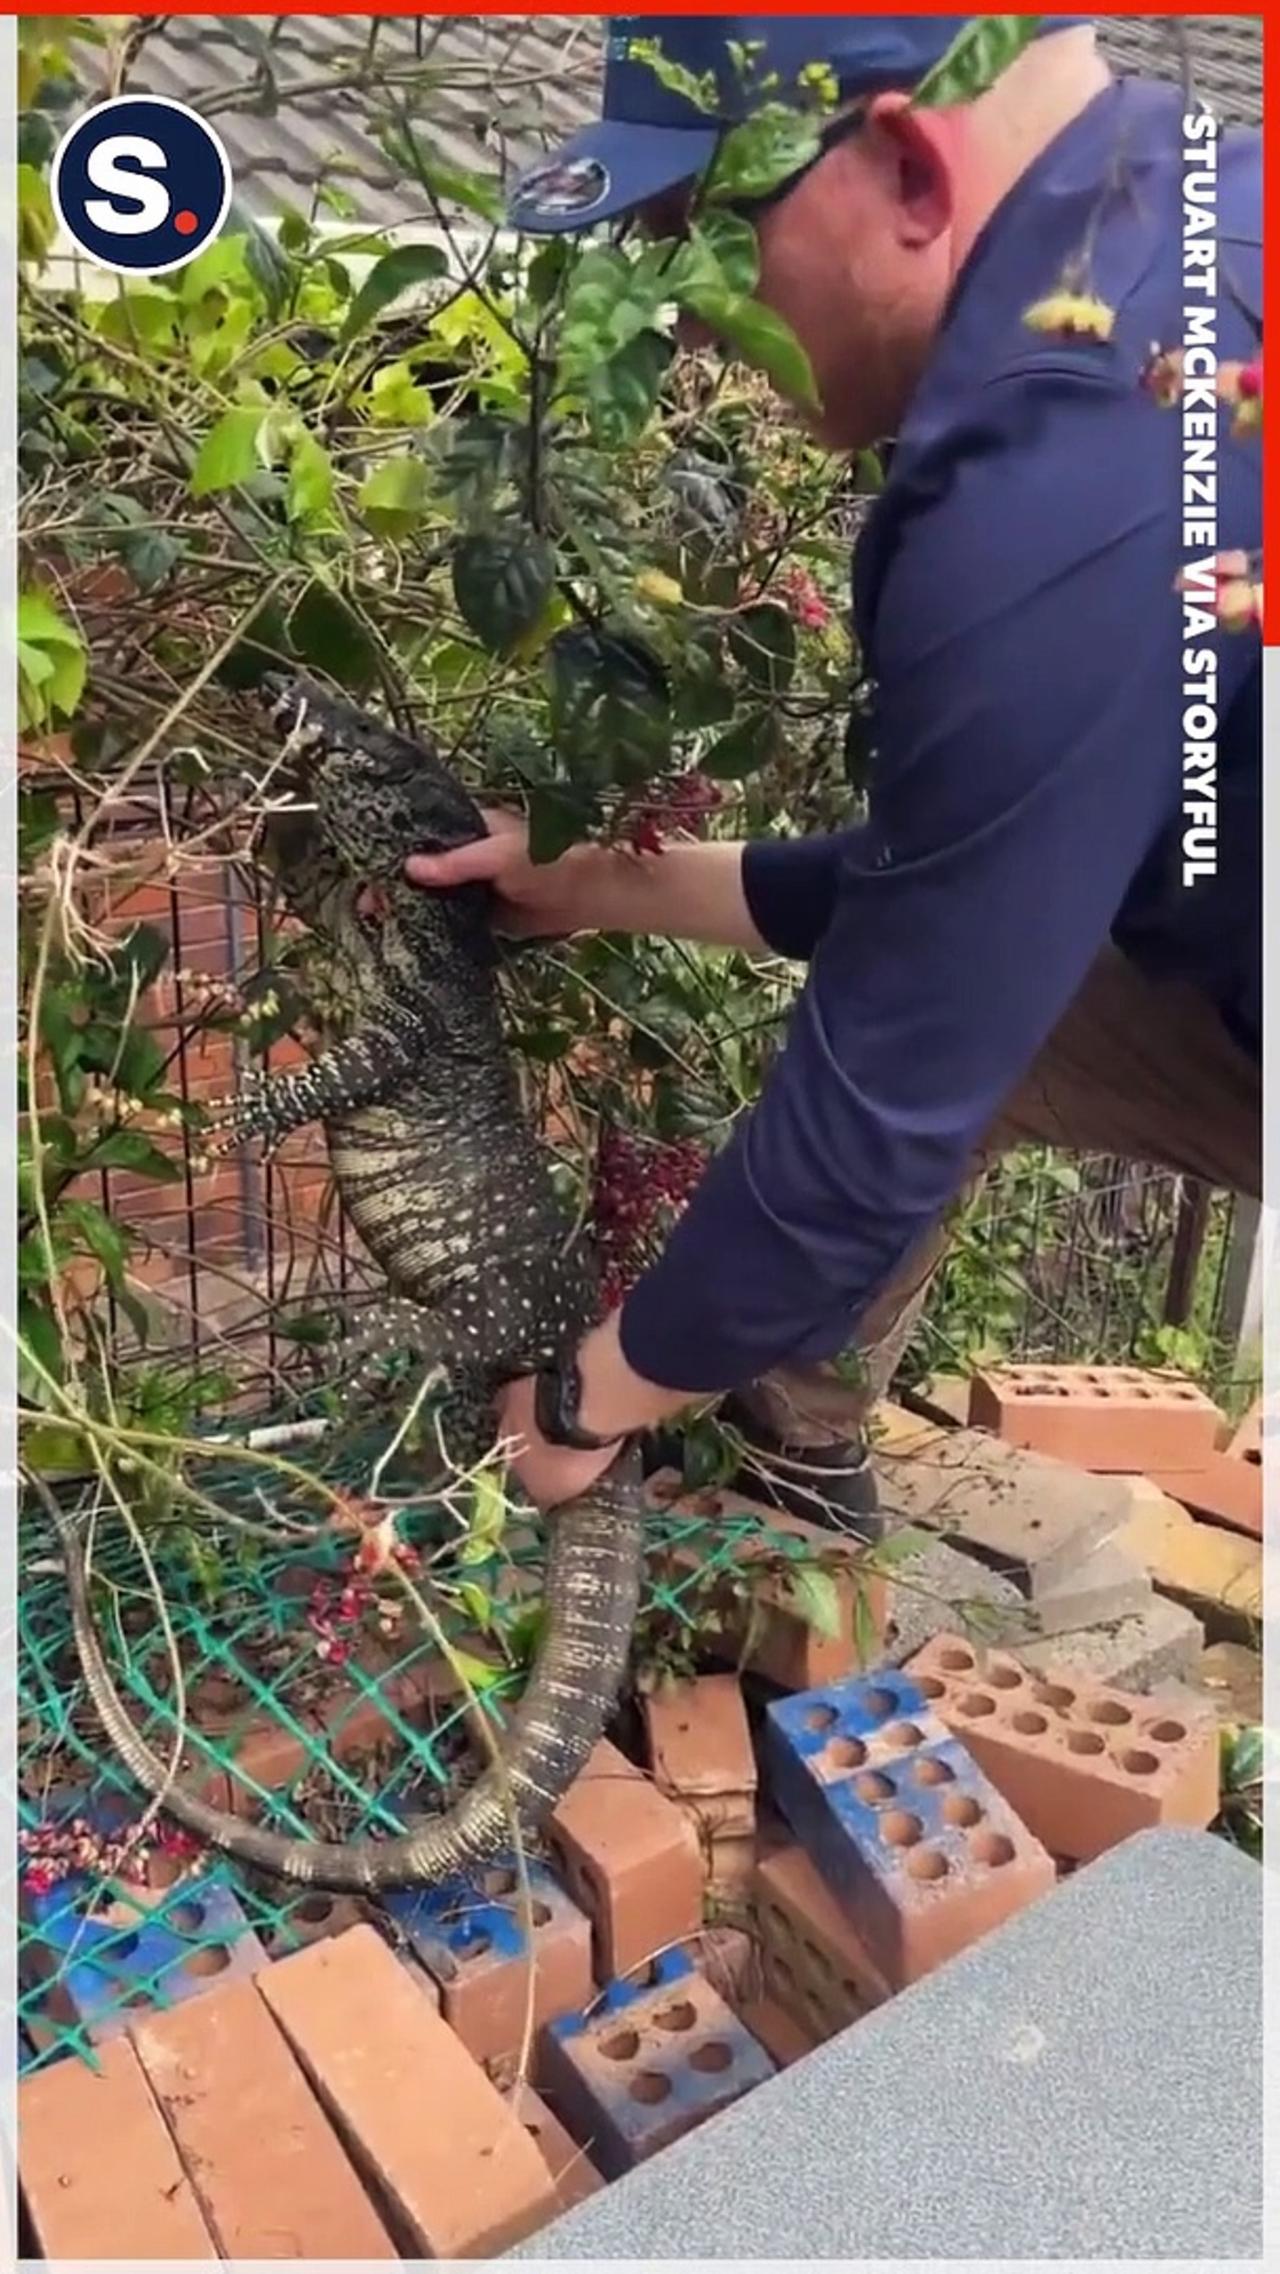 Giant Goanna Astonishes Snake Catchers During Removal From School Playground